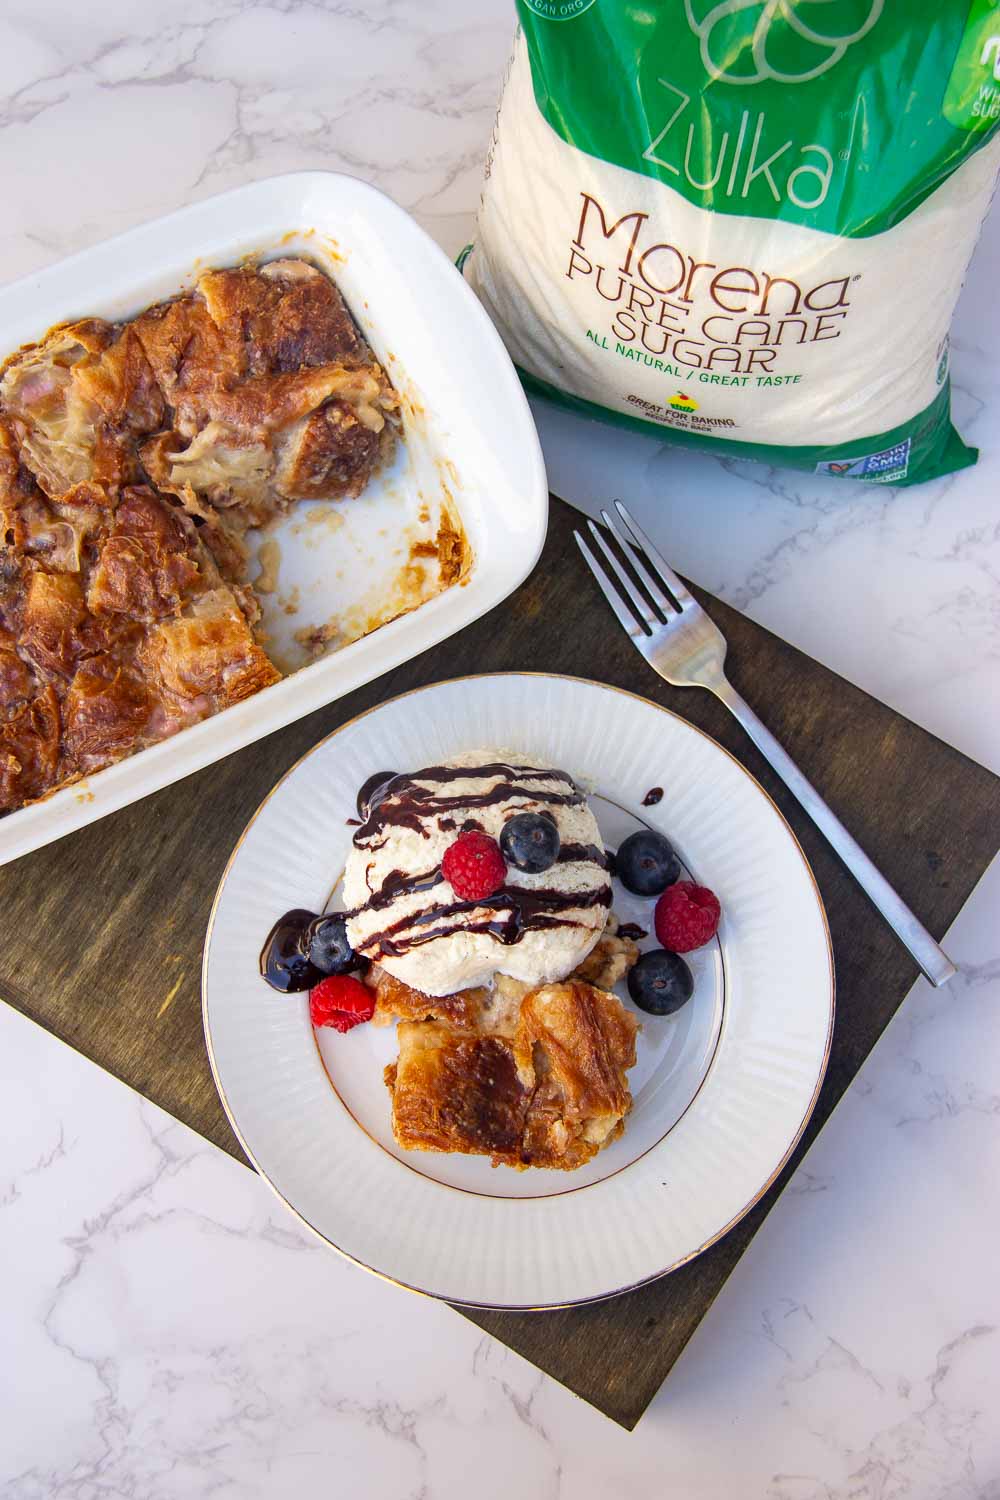 This overnight breakfast croissant casserole is so good and like a morning hug on your plate. It has the perfect mix of custard and bread pudding and is absolutely irresistible with all the fresh berries thrown in.